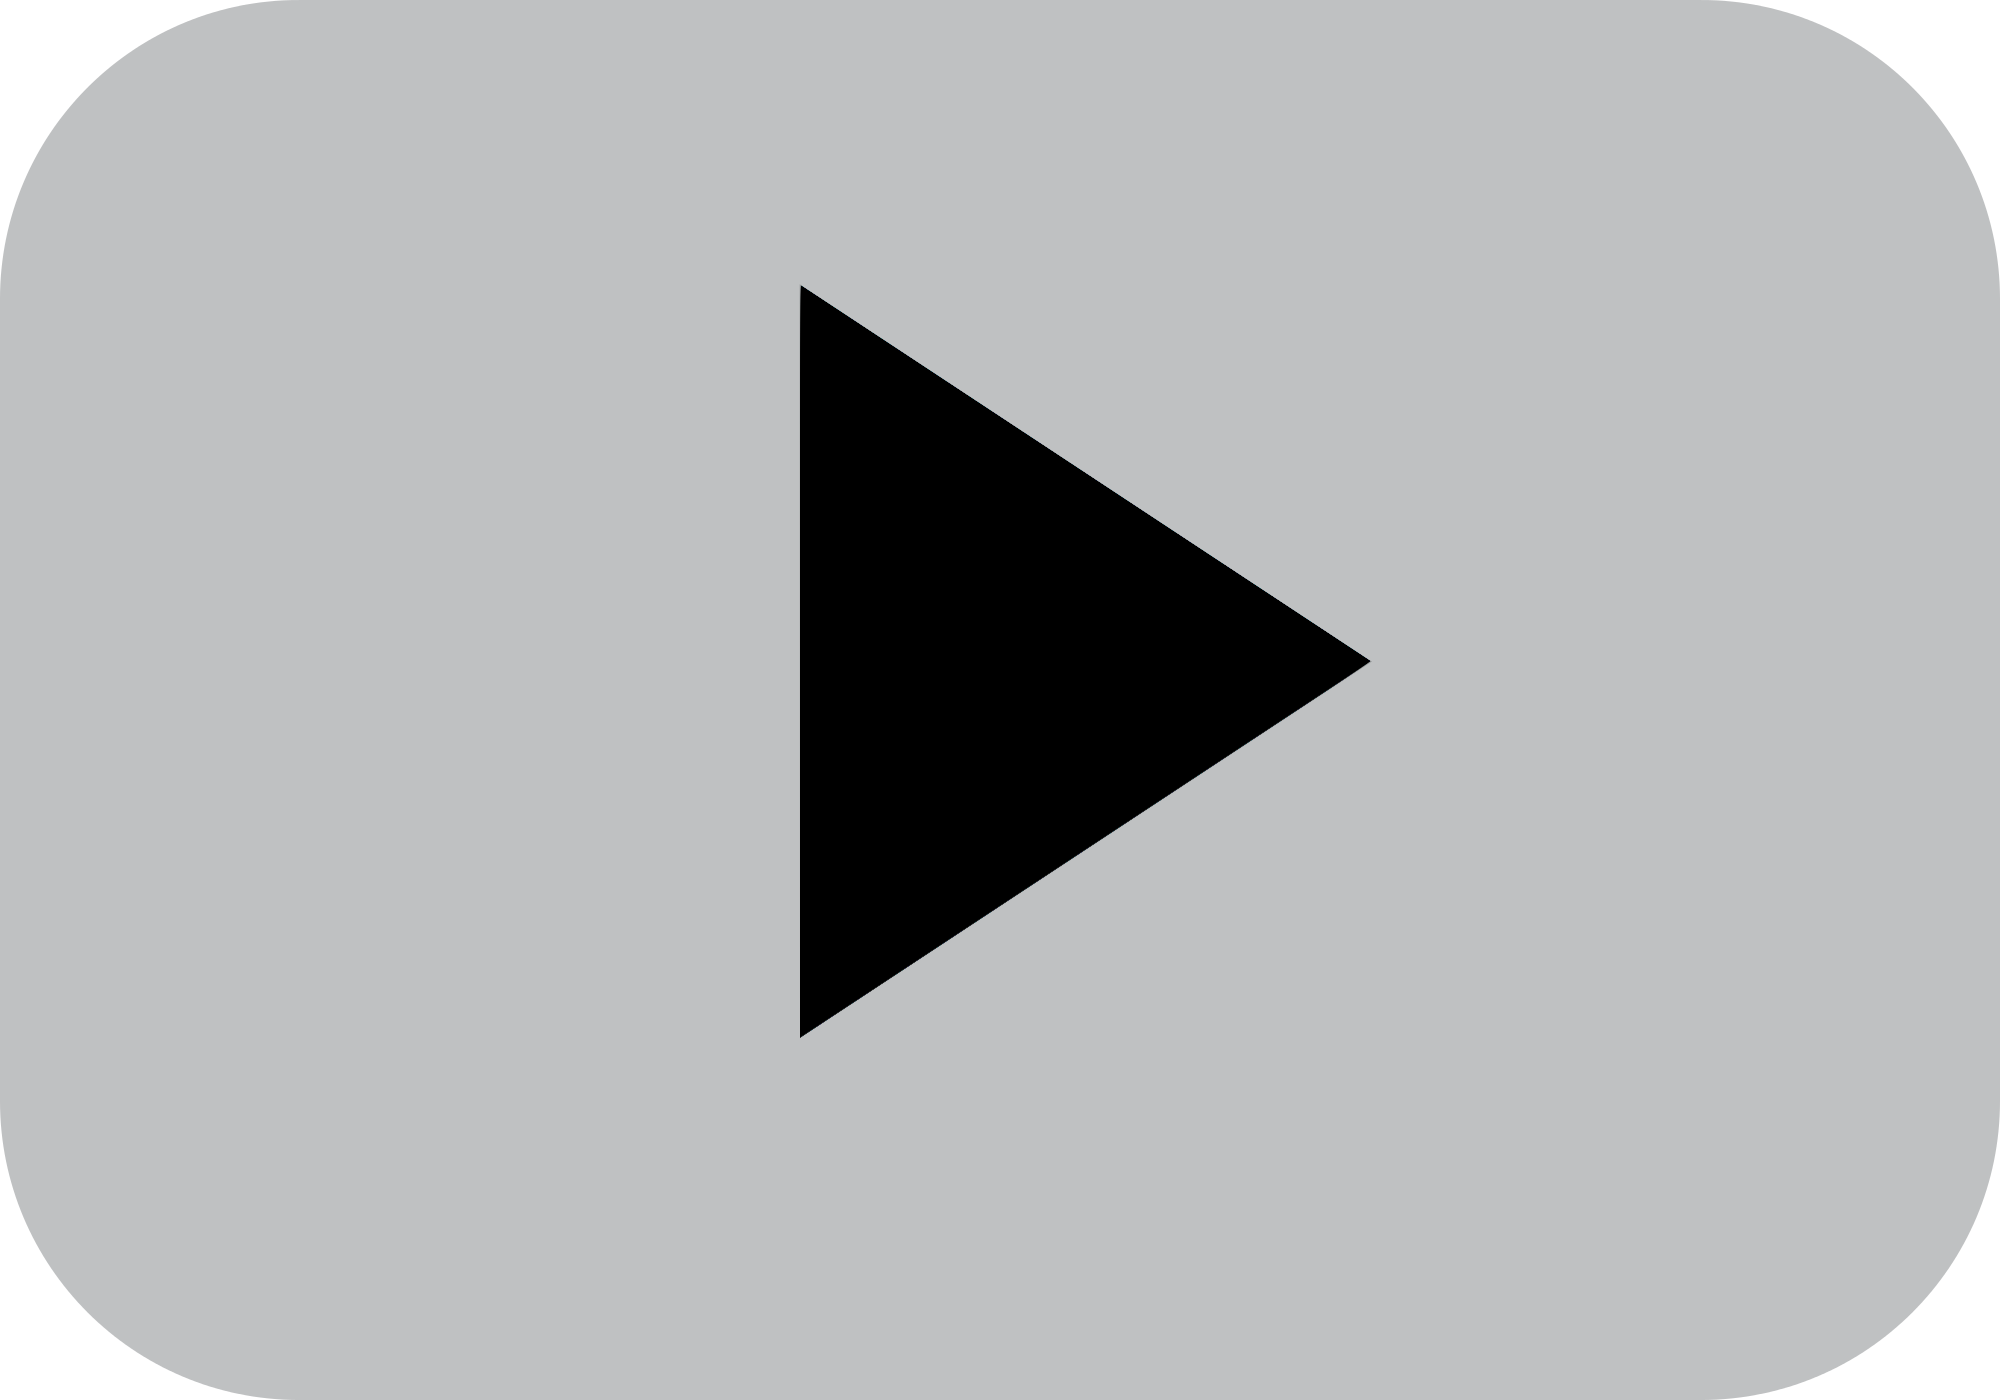 File:YouTube Silver Play Button.png - Wikipedia